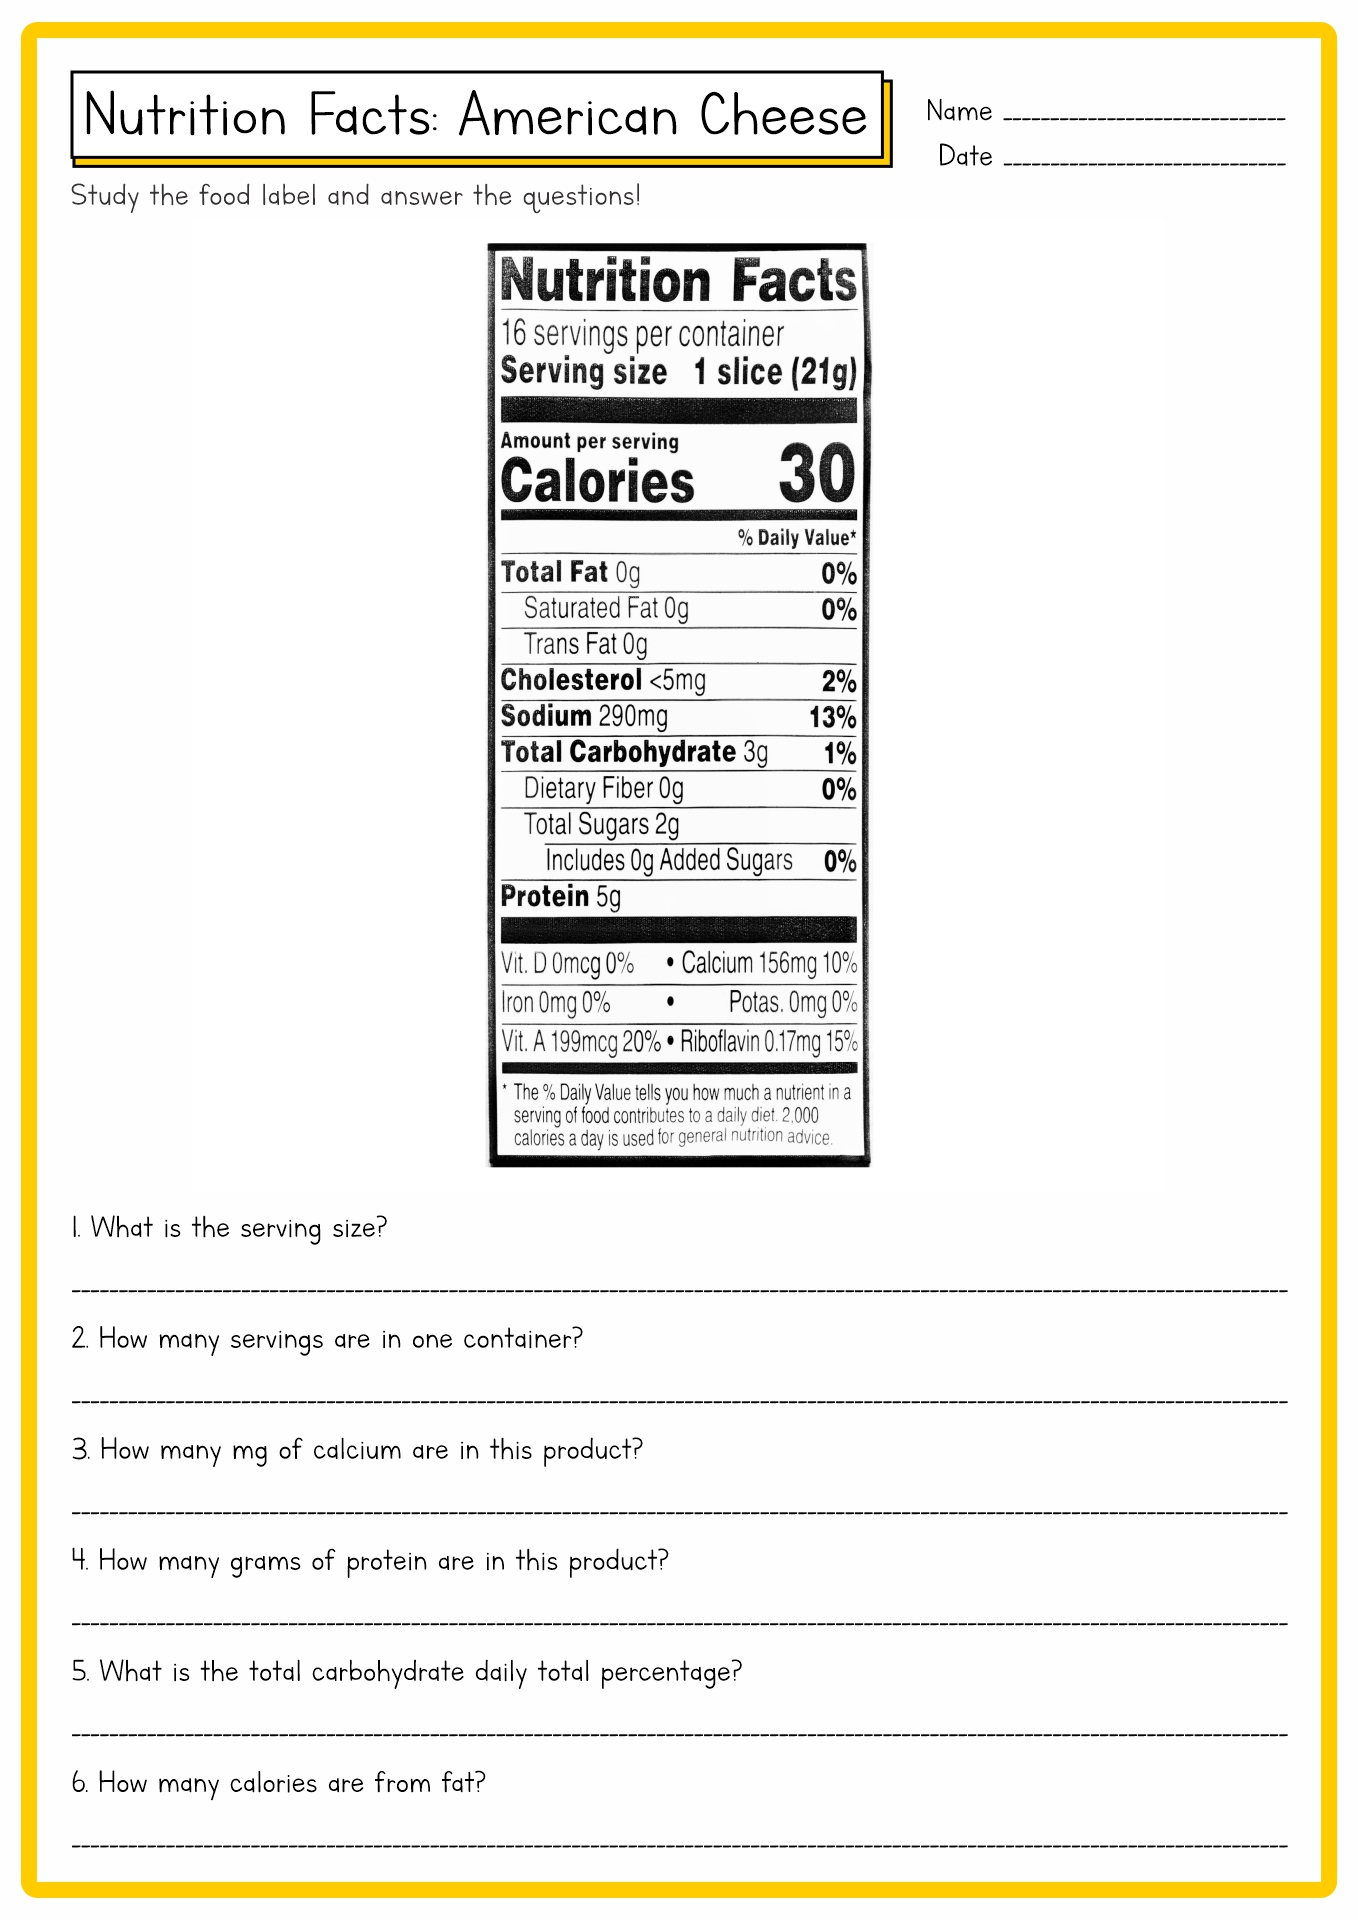 American Cheese Nutrition Facts Label Image